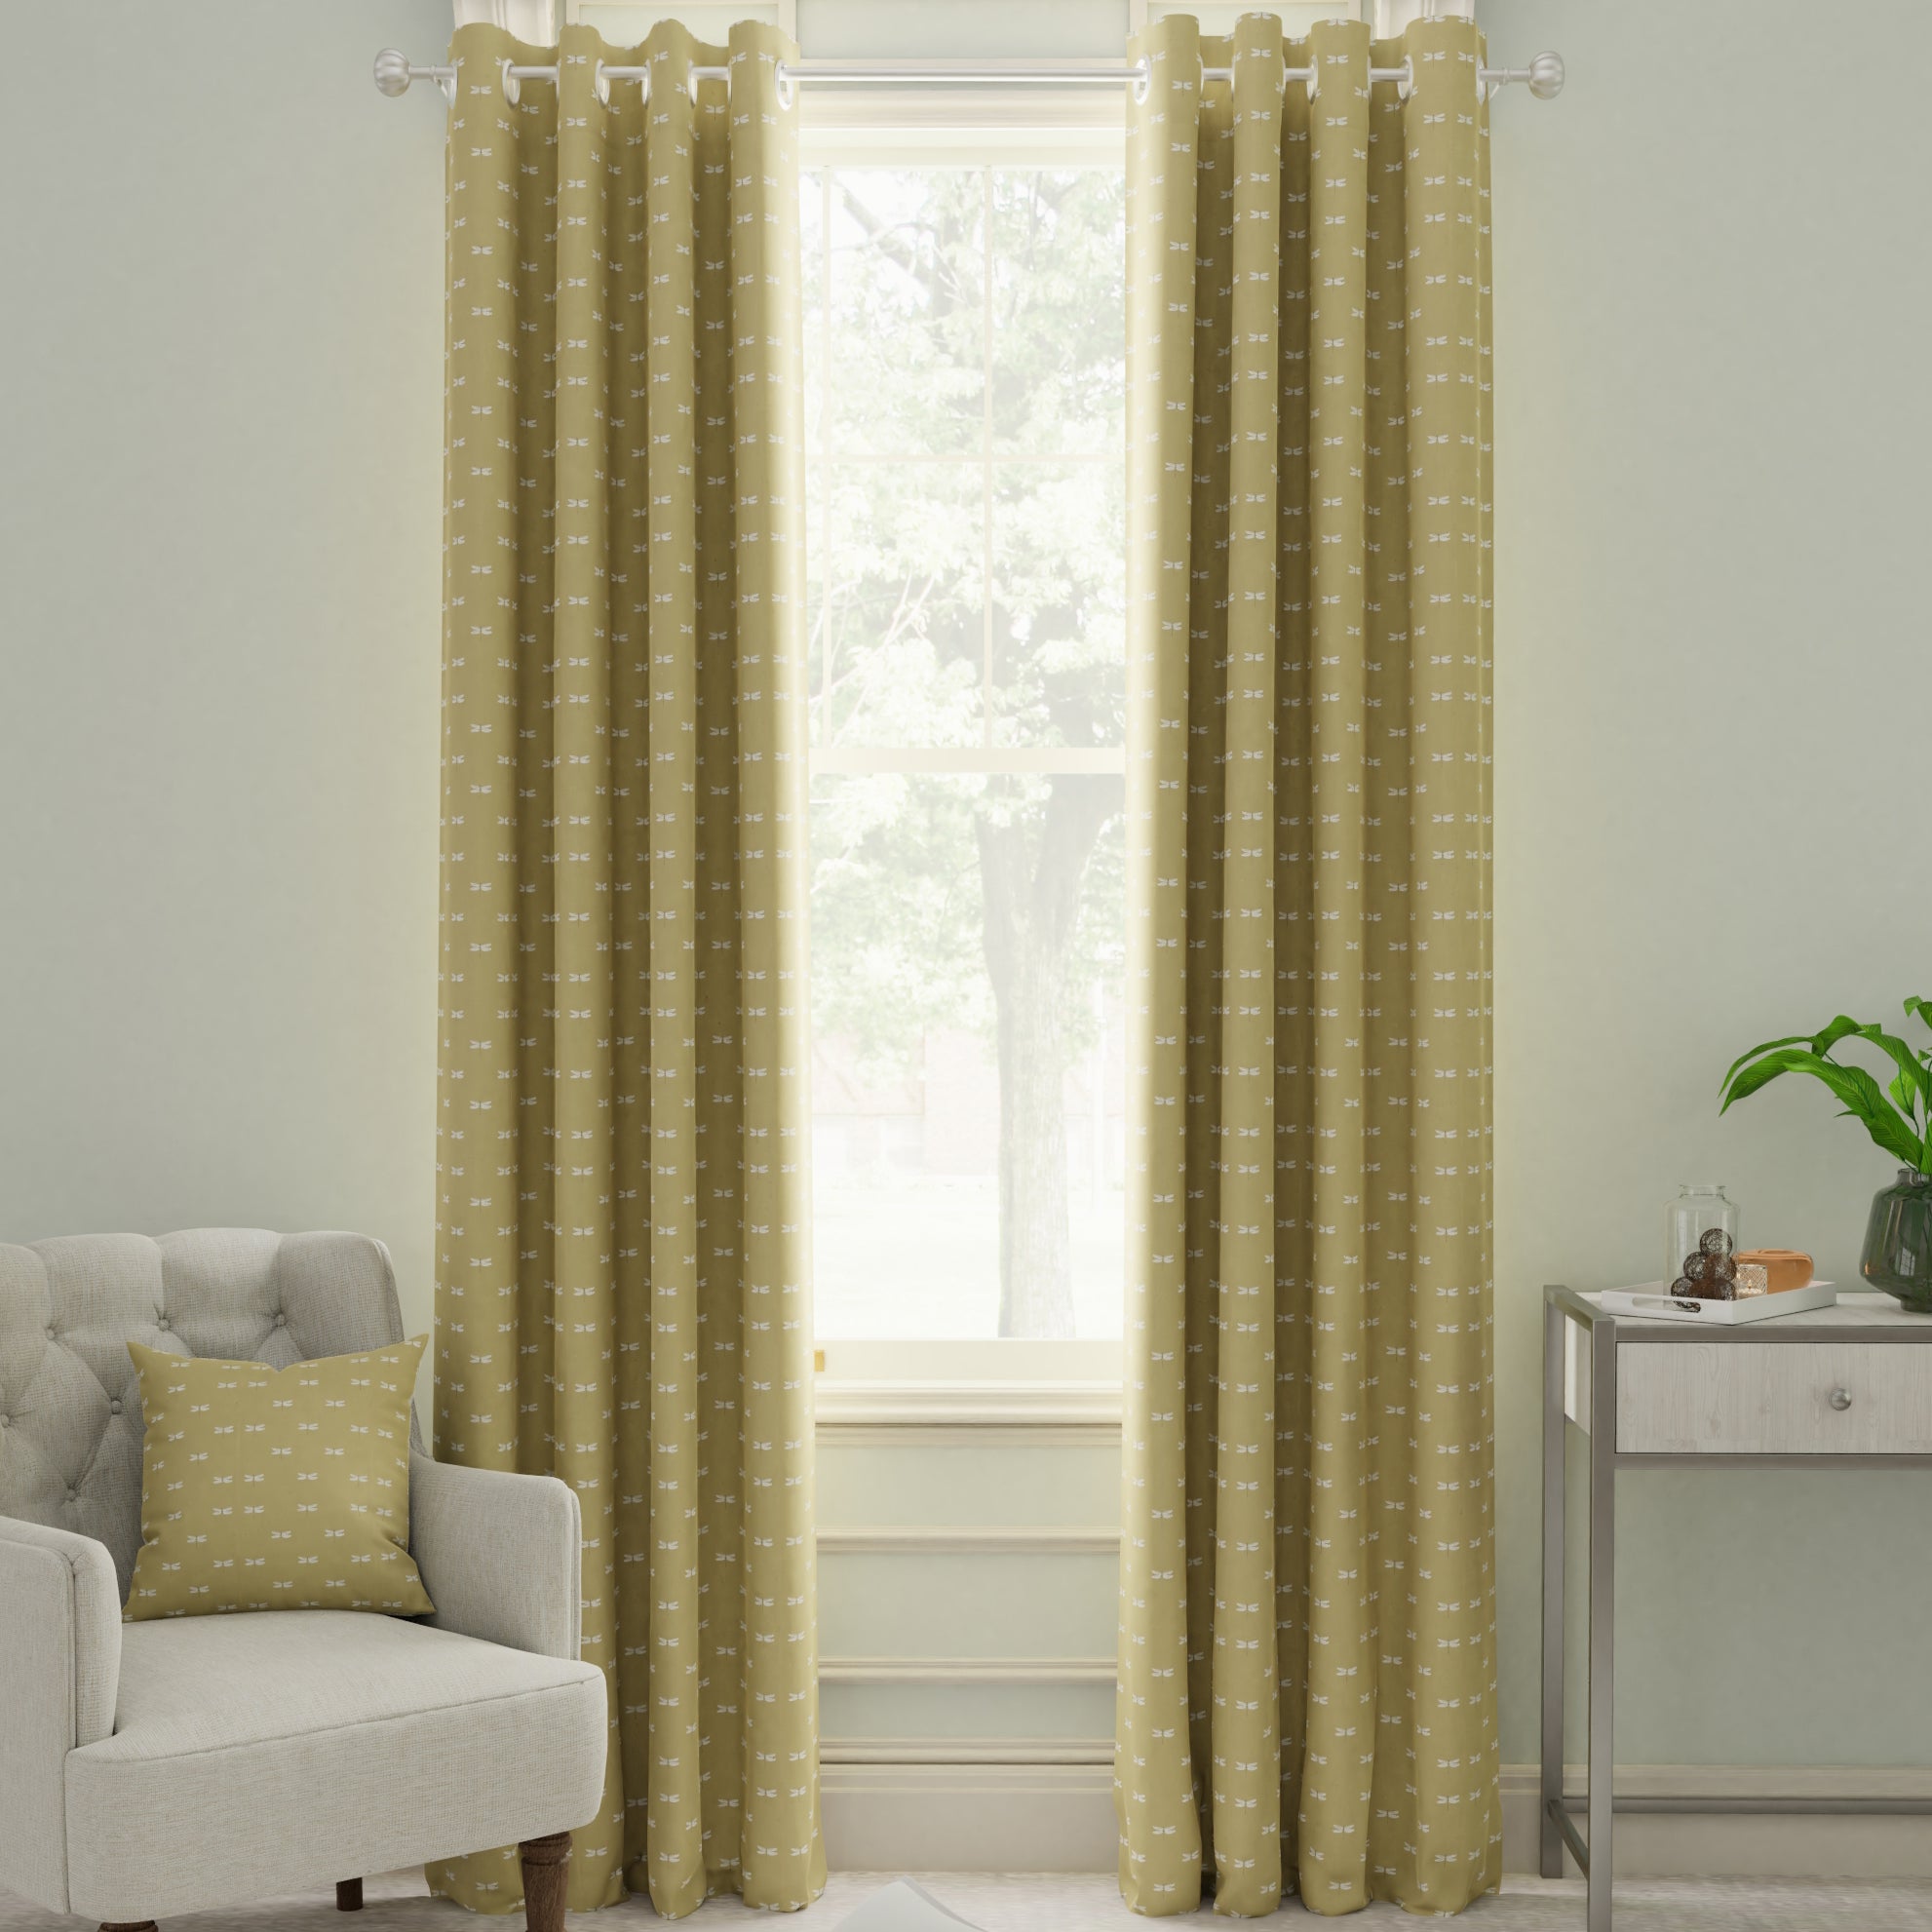 Sophie Allport Dragonfly Made To Measure Curtains Deep Mustard